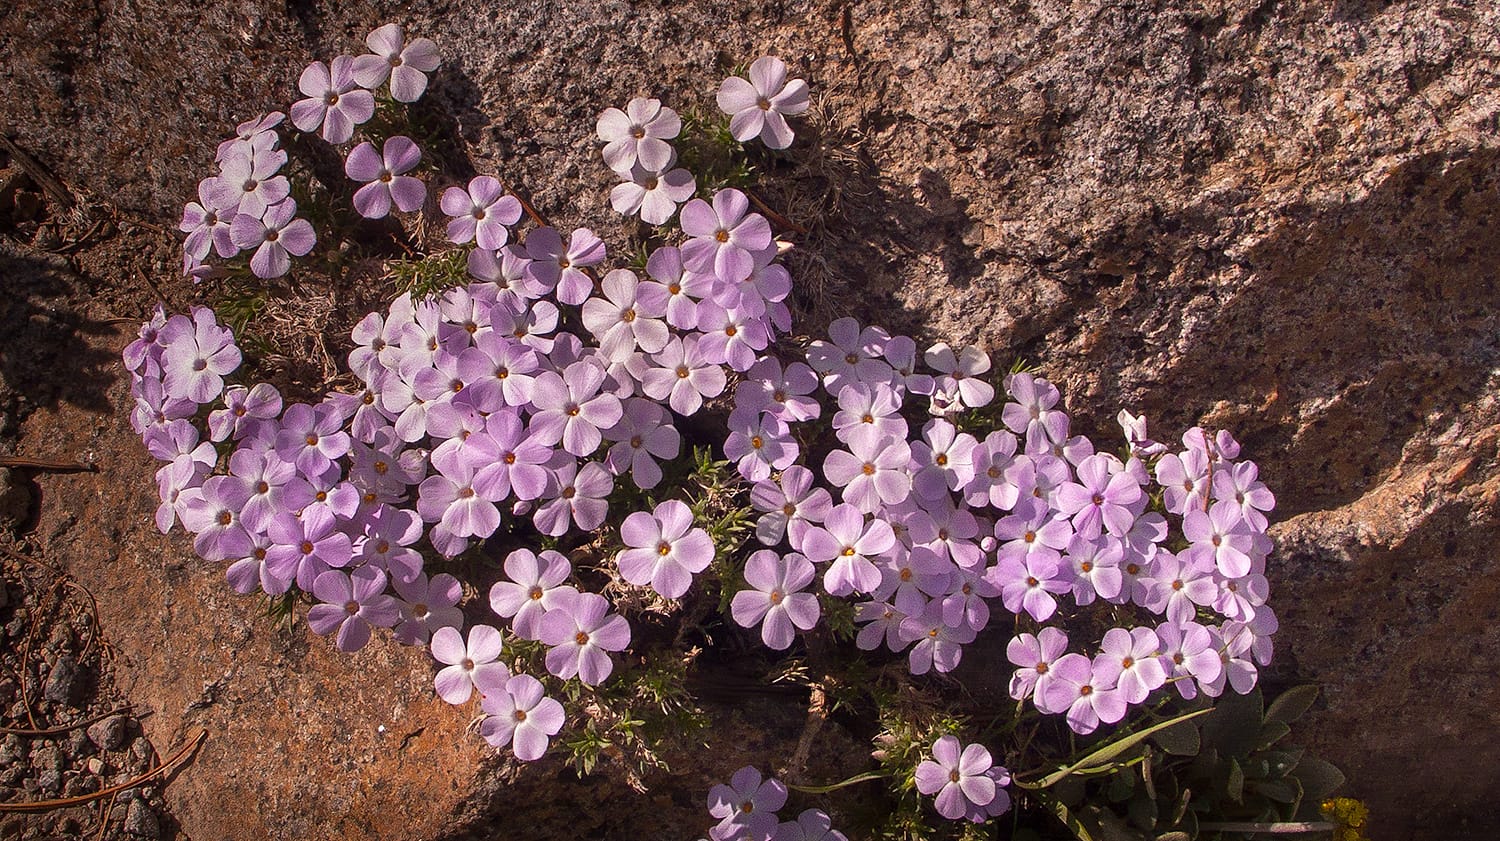 Mentoring for flower essence practitioners offers community like the Spreading Phlox qualities